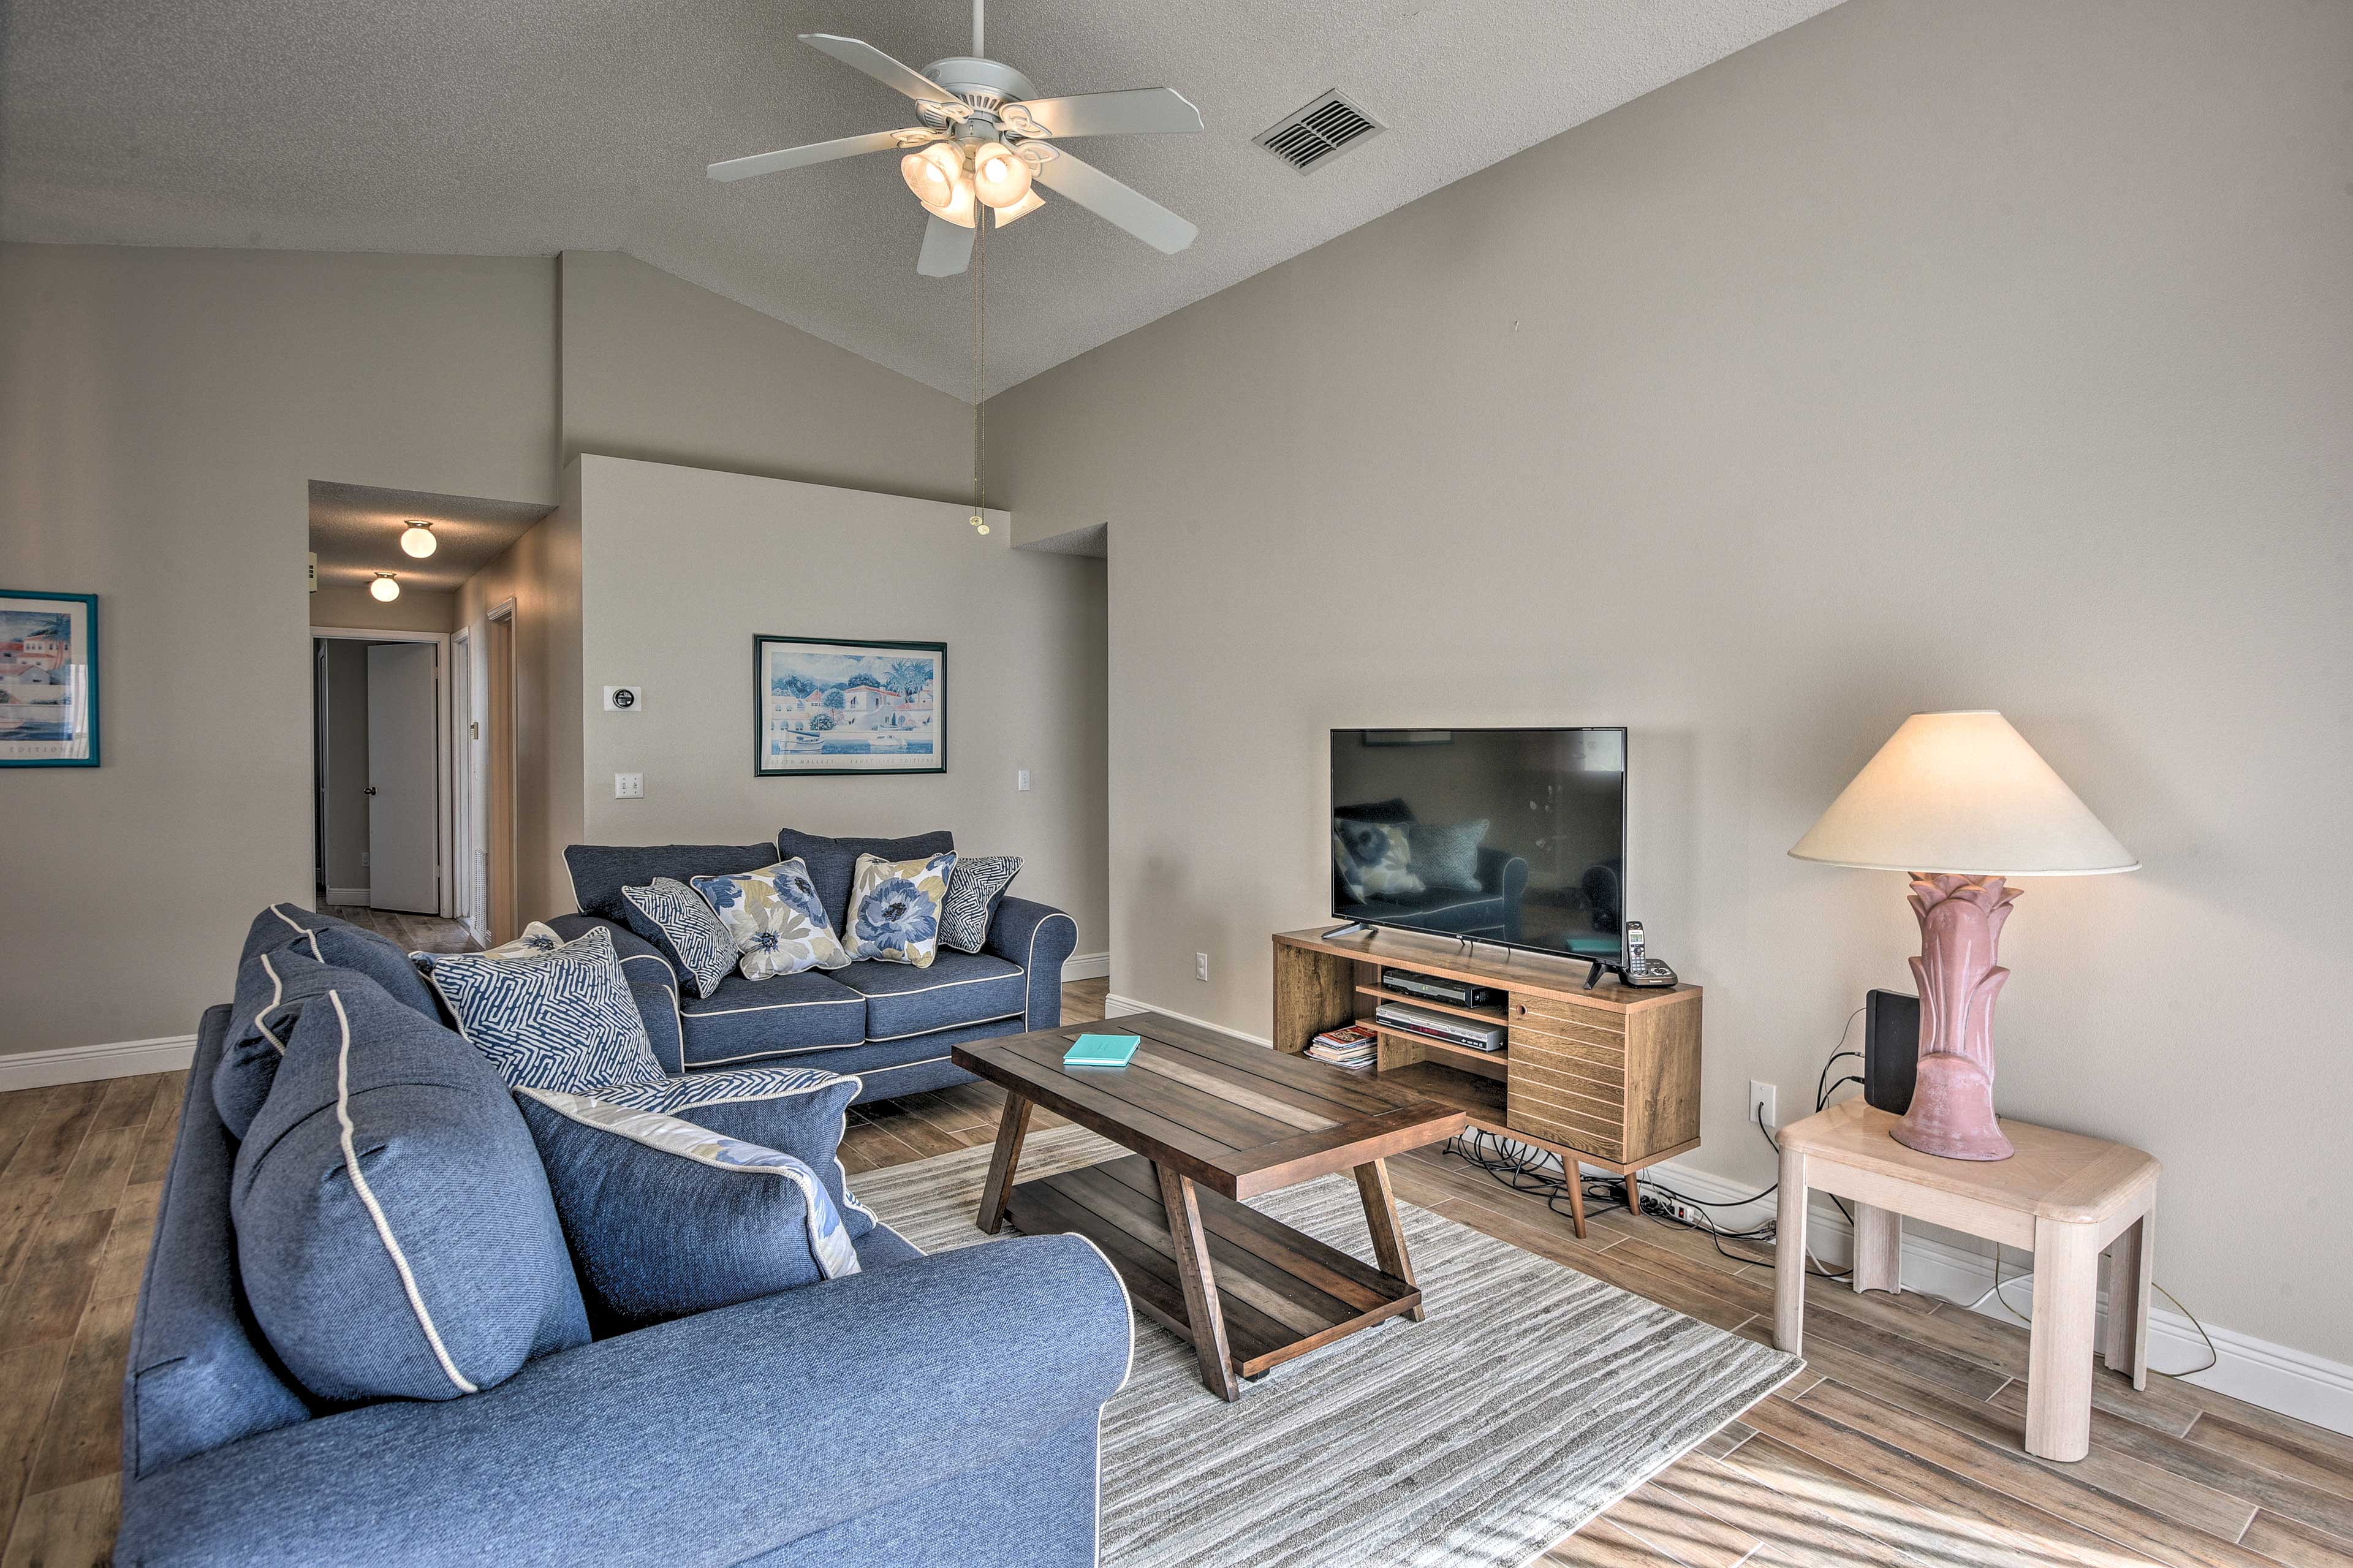 This 3-bedroom, 2-bath Kissimmee home offers 6 guests a relaxing stay.